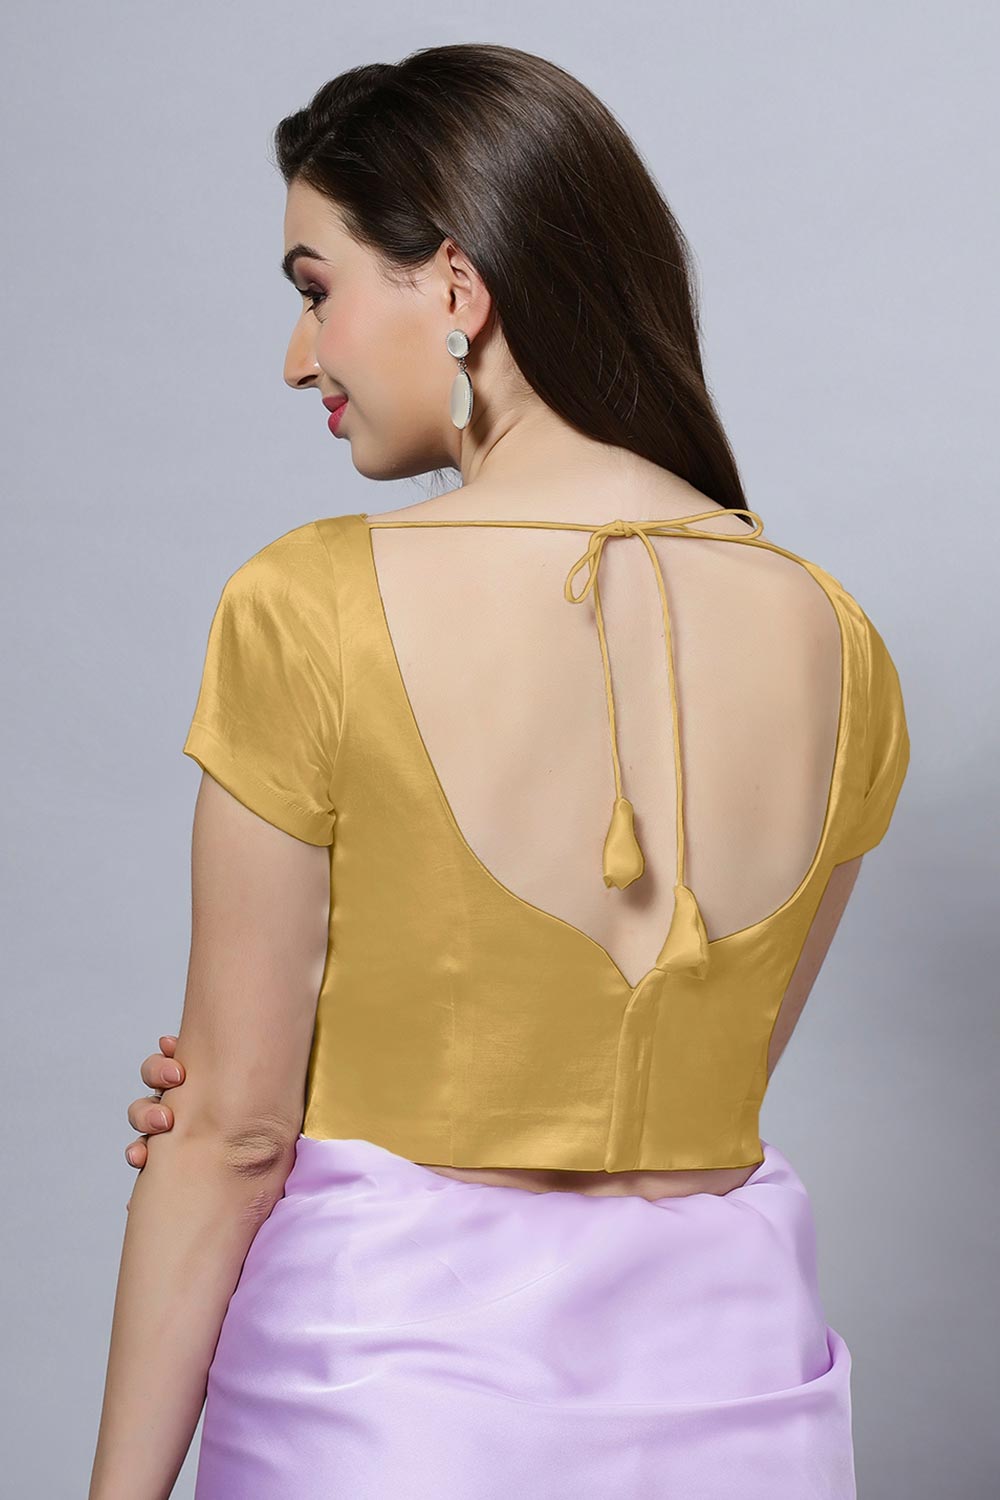 Ria Gold Satin Comfort Stretch Crop Top Short Sleeve Blouse